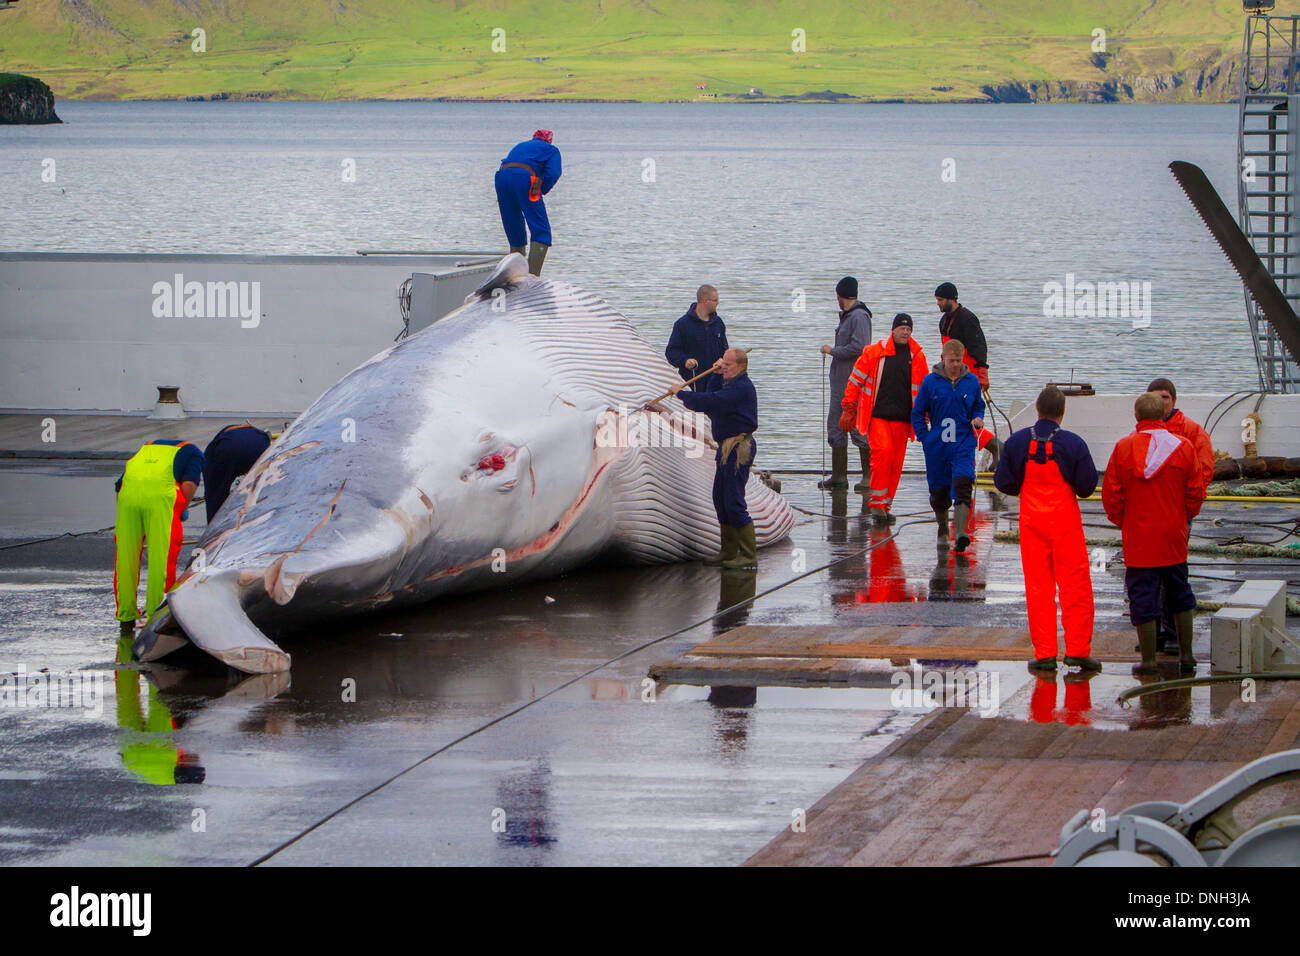 CUTTING UP OF A FINBACK WHALE AT THE SEASIDE RESORT OF HVALFJORDUR, THE FJORD OF WHALES, WHALE HUNTING IN ICELAND, WESTERN ICELAND, EUROPE Stock Photo